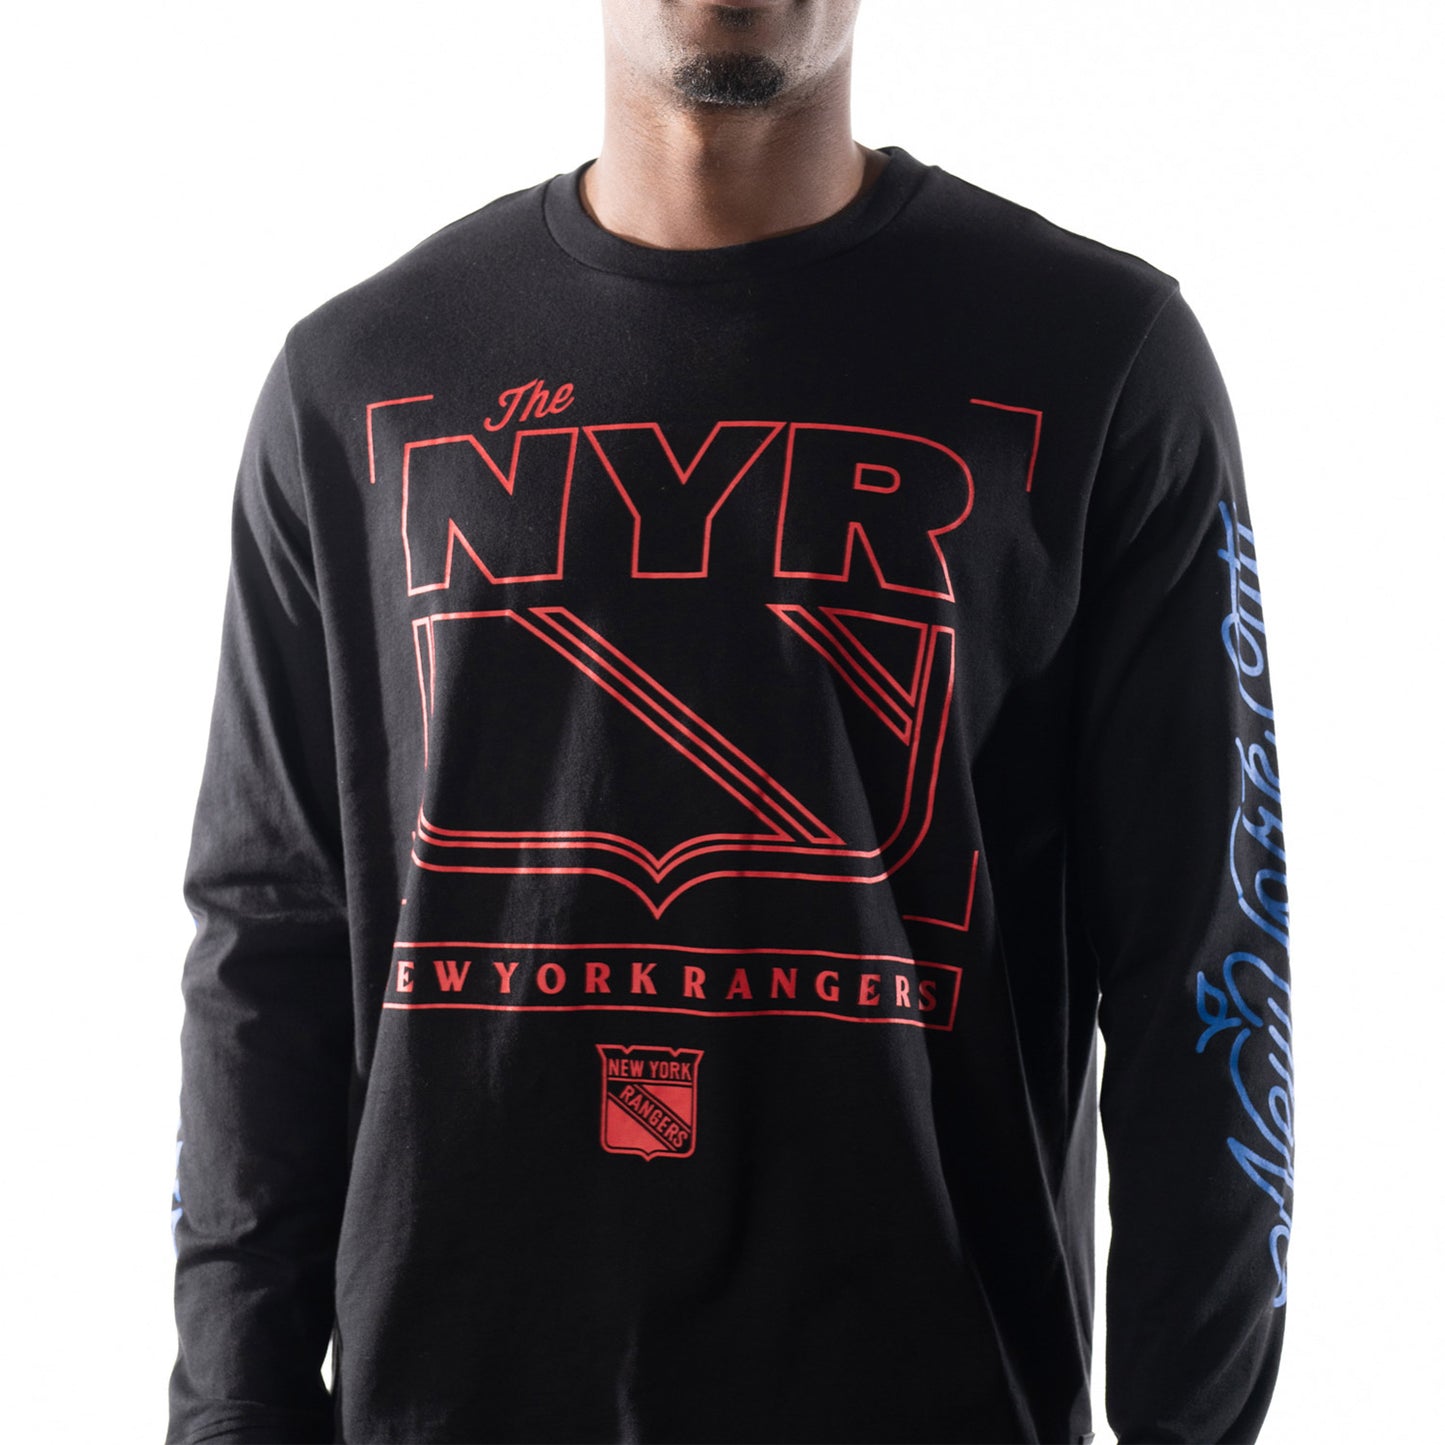 Wild Collective Rangers Long Sleeve Tee In Black, Red & Blue - Front View On Model